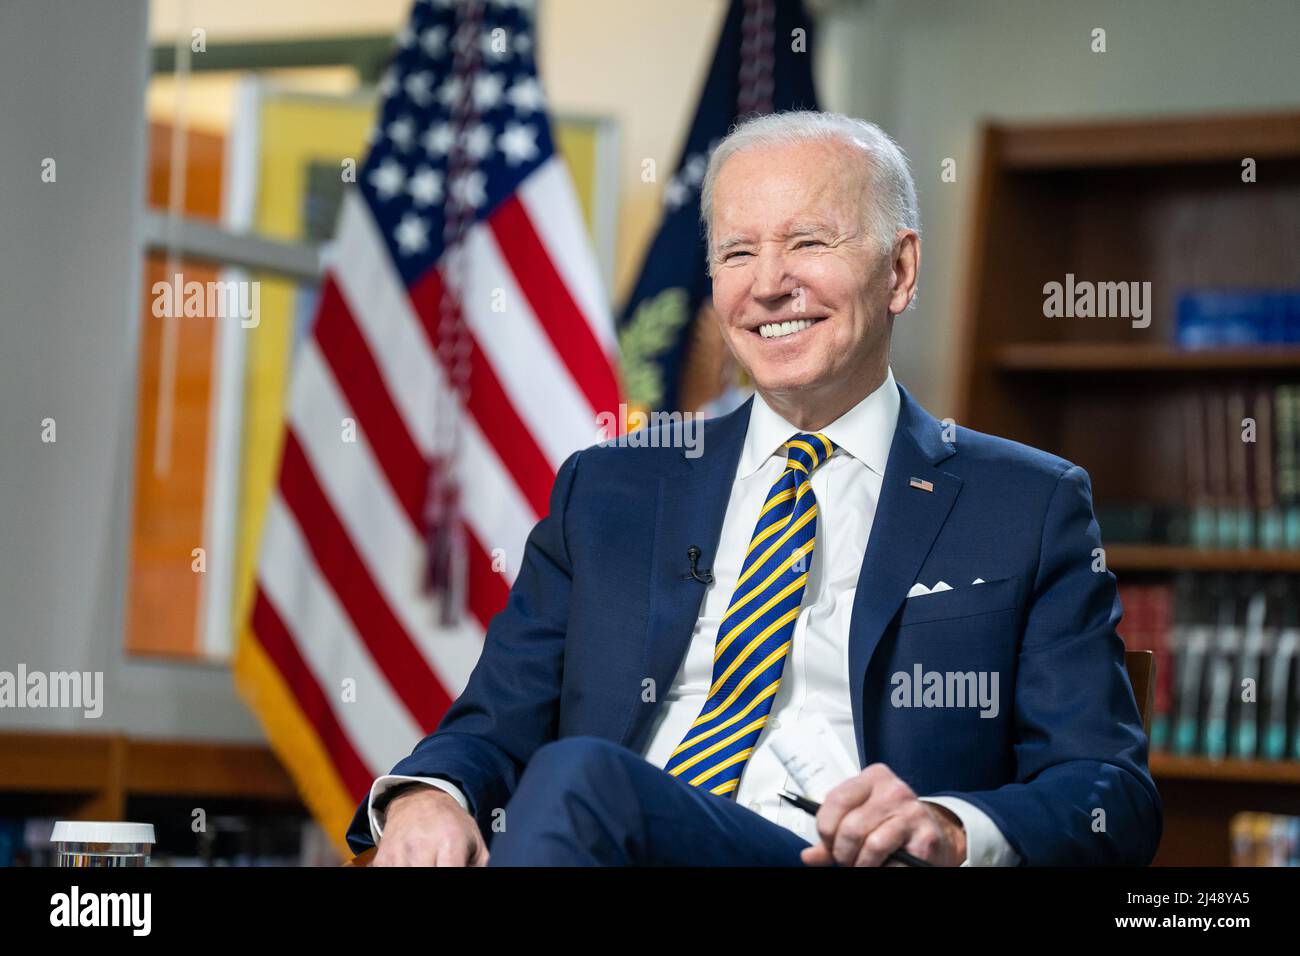 CULPEPER, VIRGINIA, USA - 10 February 2022 - US President Joe Biden participates in a taped interview with Lester Holt of NBC Nightly News Thursday, F Stock Photo